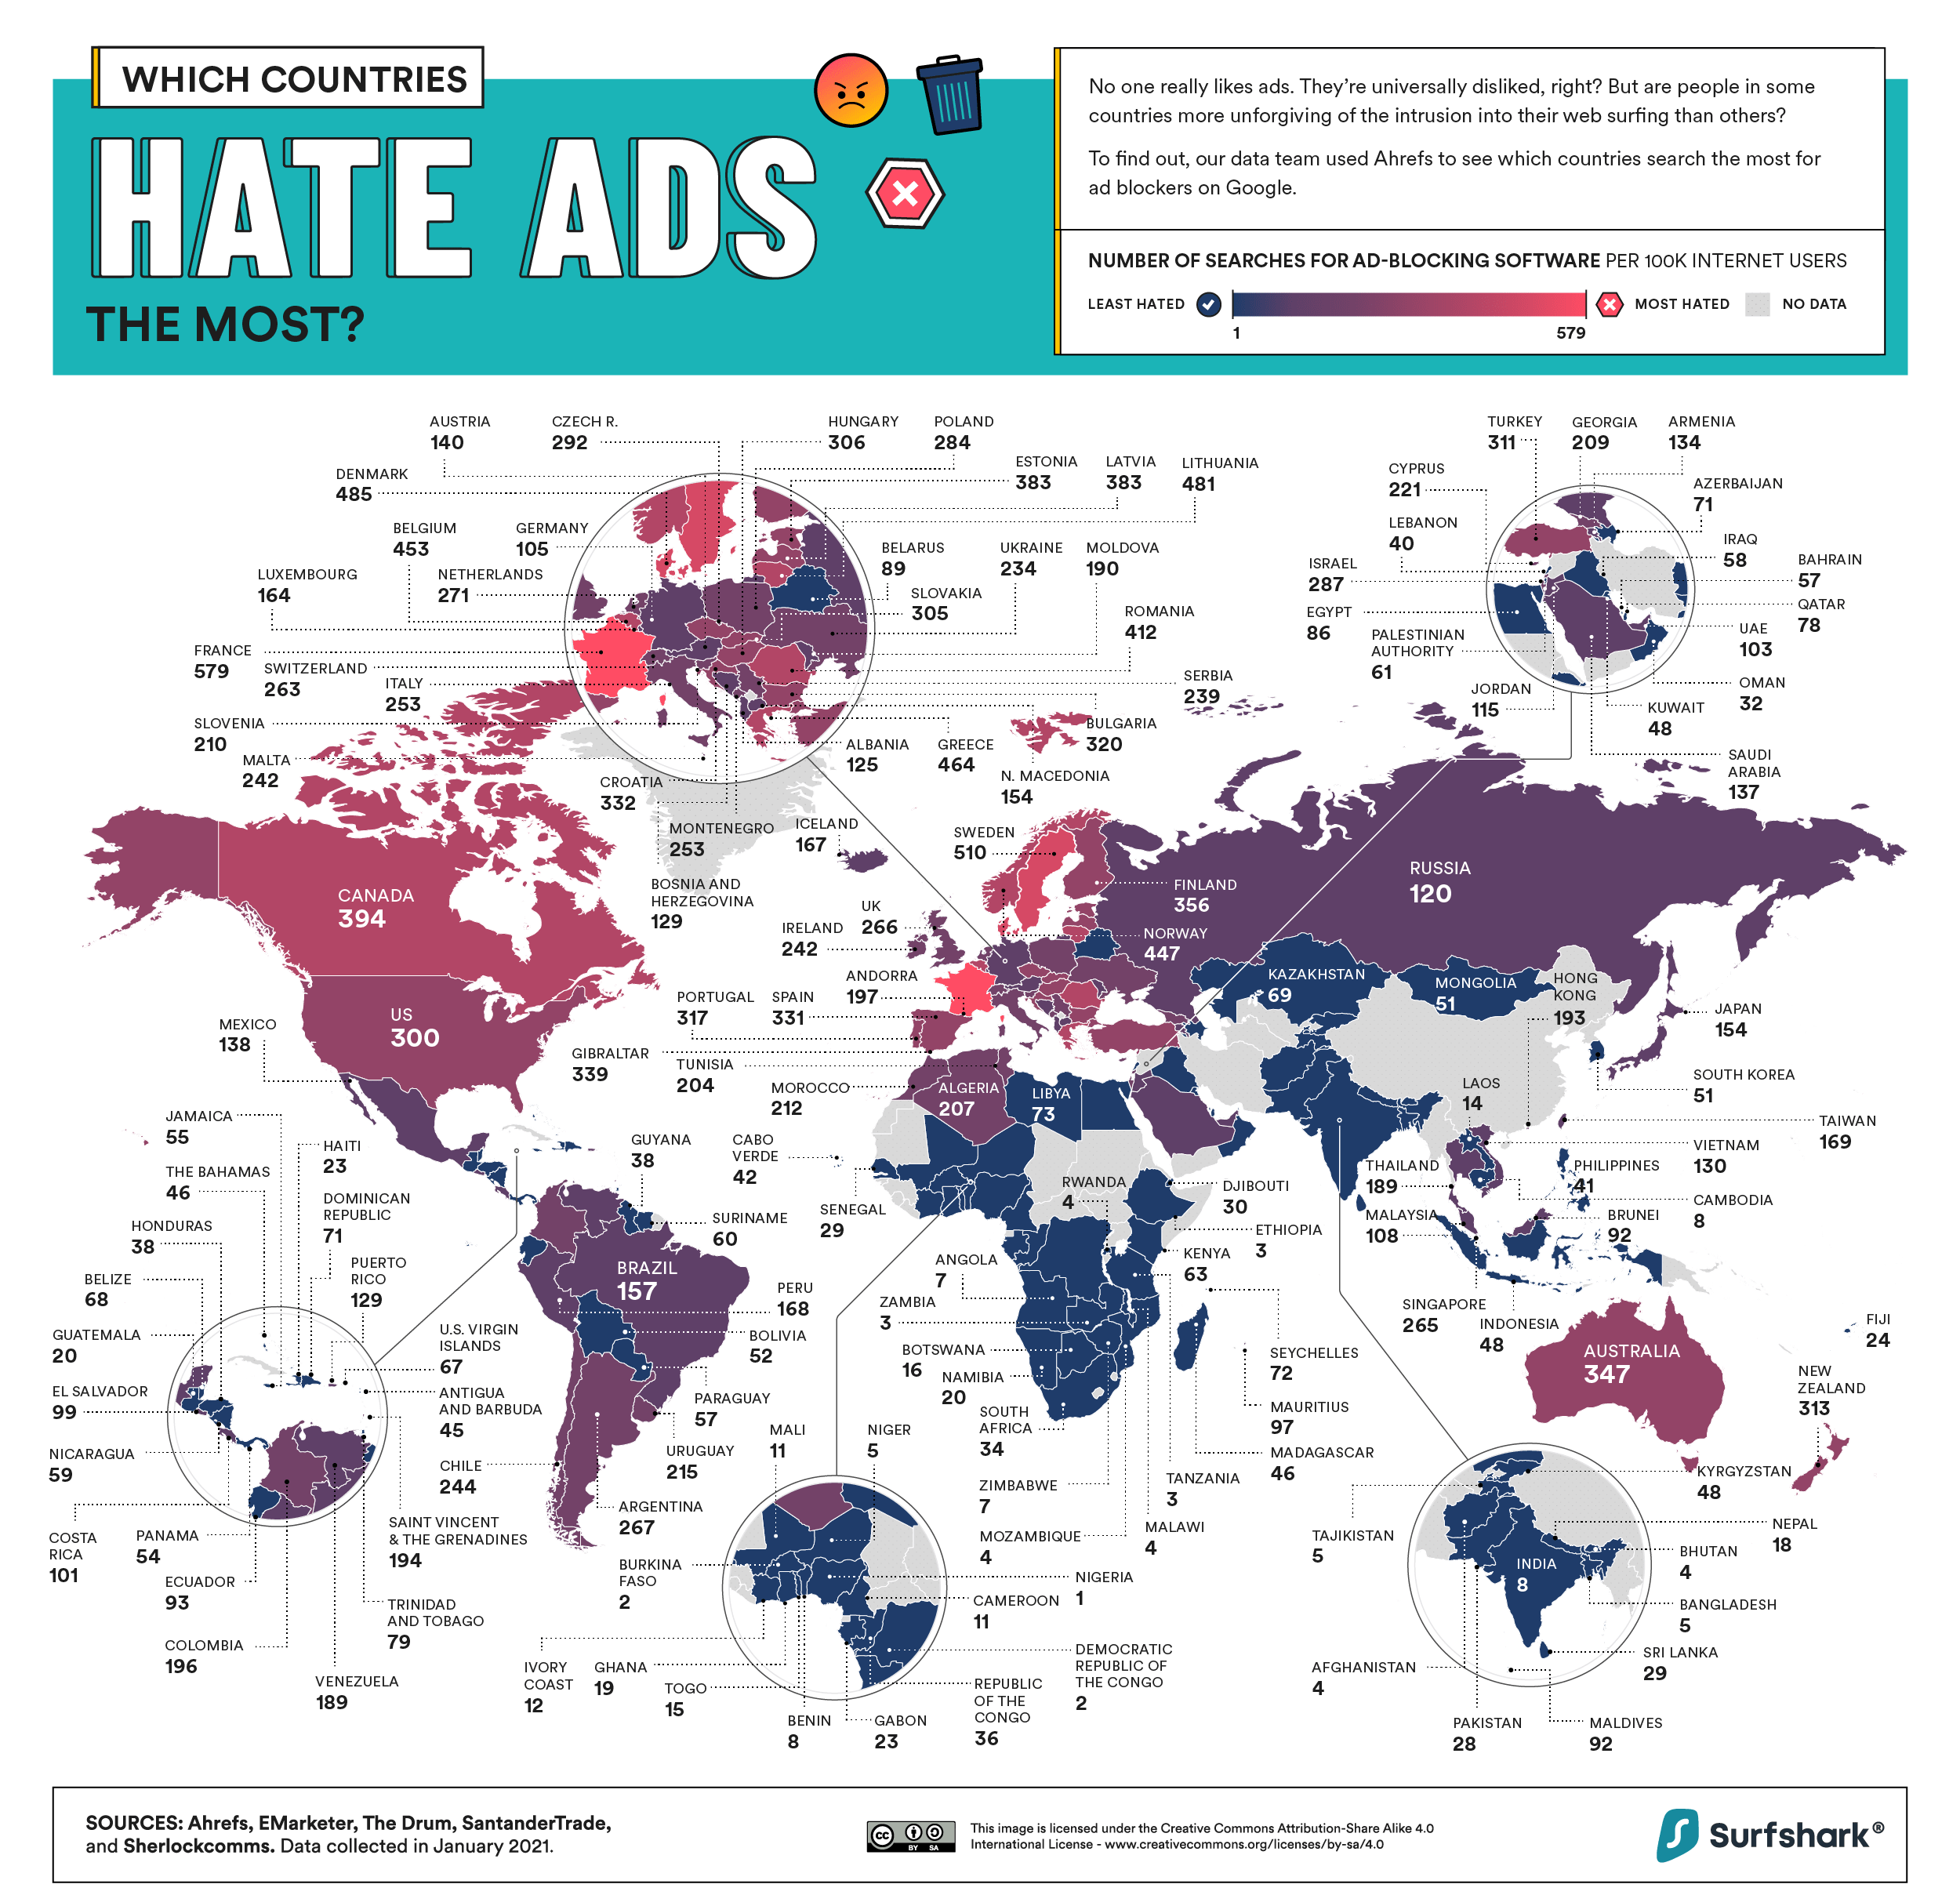 a map that shows which countries in the world made the most Google searches for ad blocking software